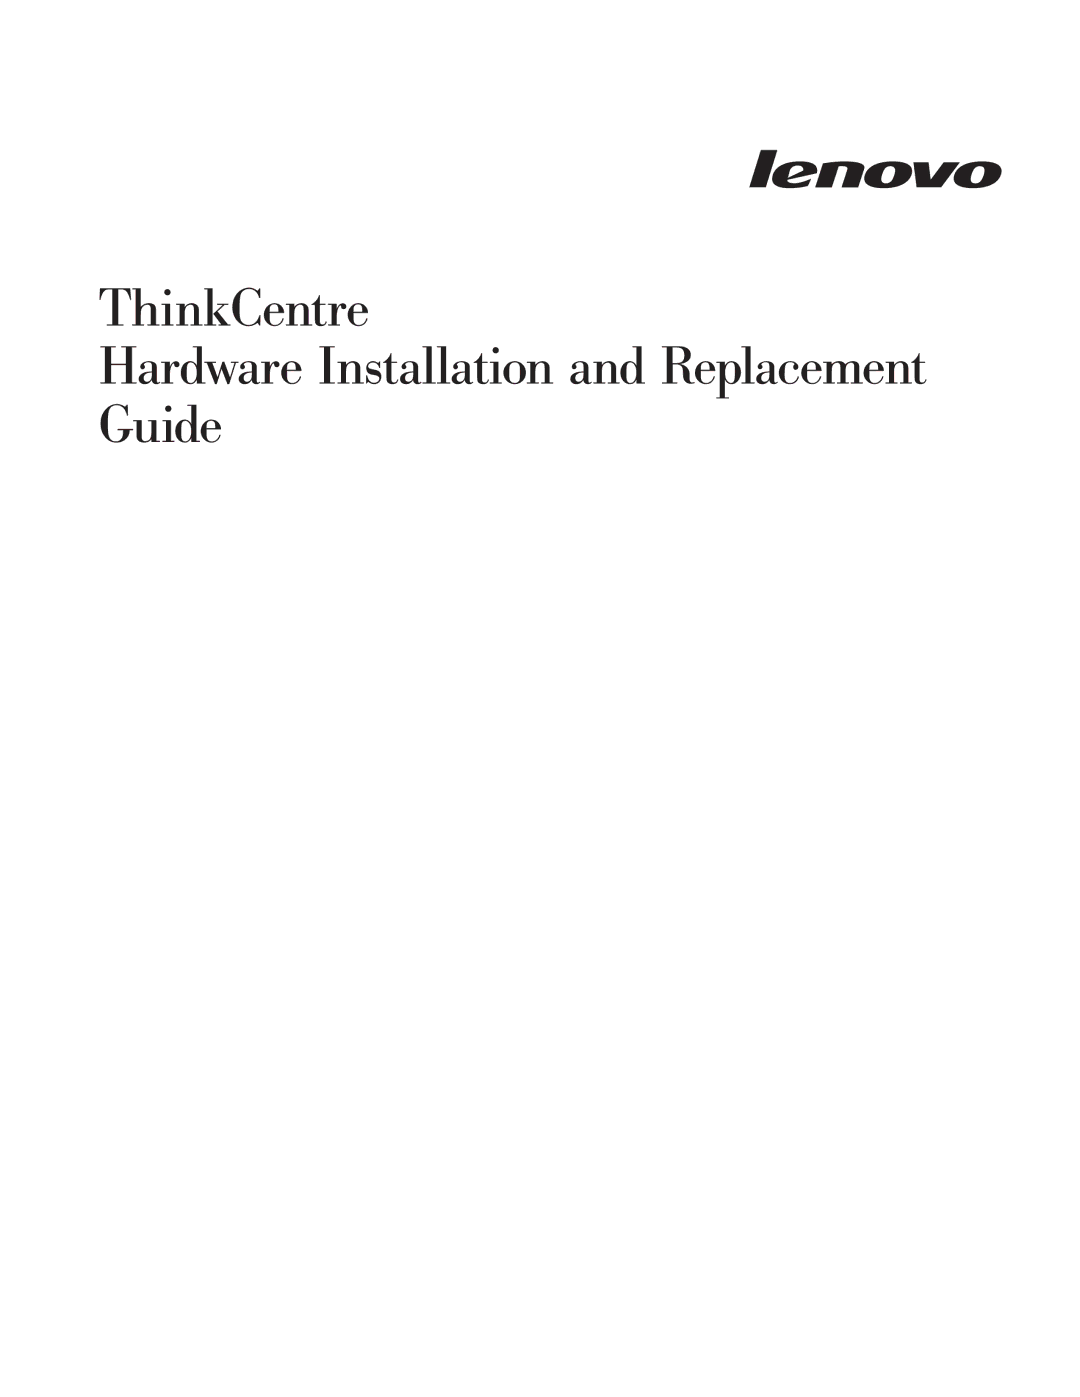 Lenovo 8336 manual ThinkCentre Hardware Installation and Replacement Guide 